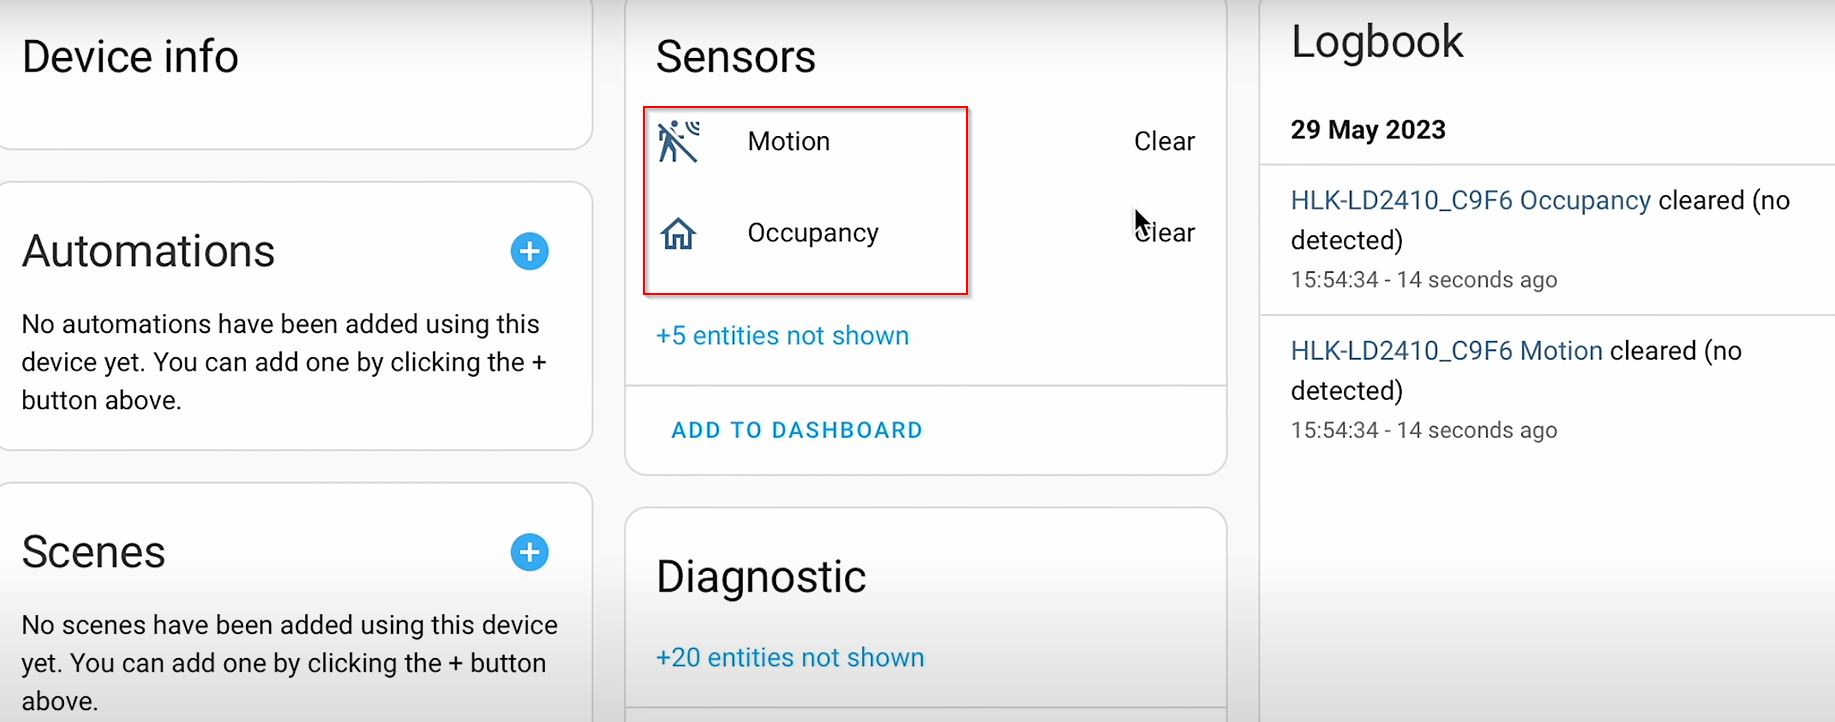 Motion and Occupancy sensors visible in Home Assistant by default